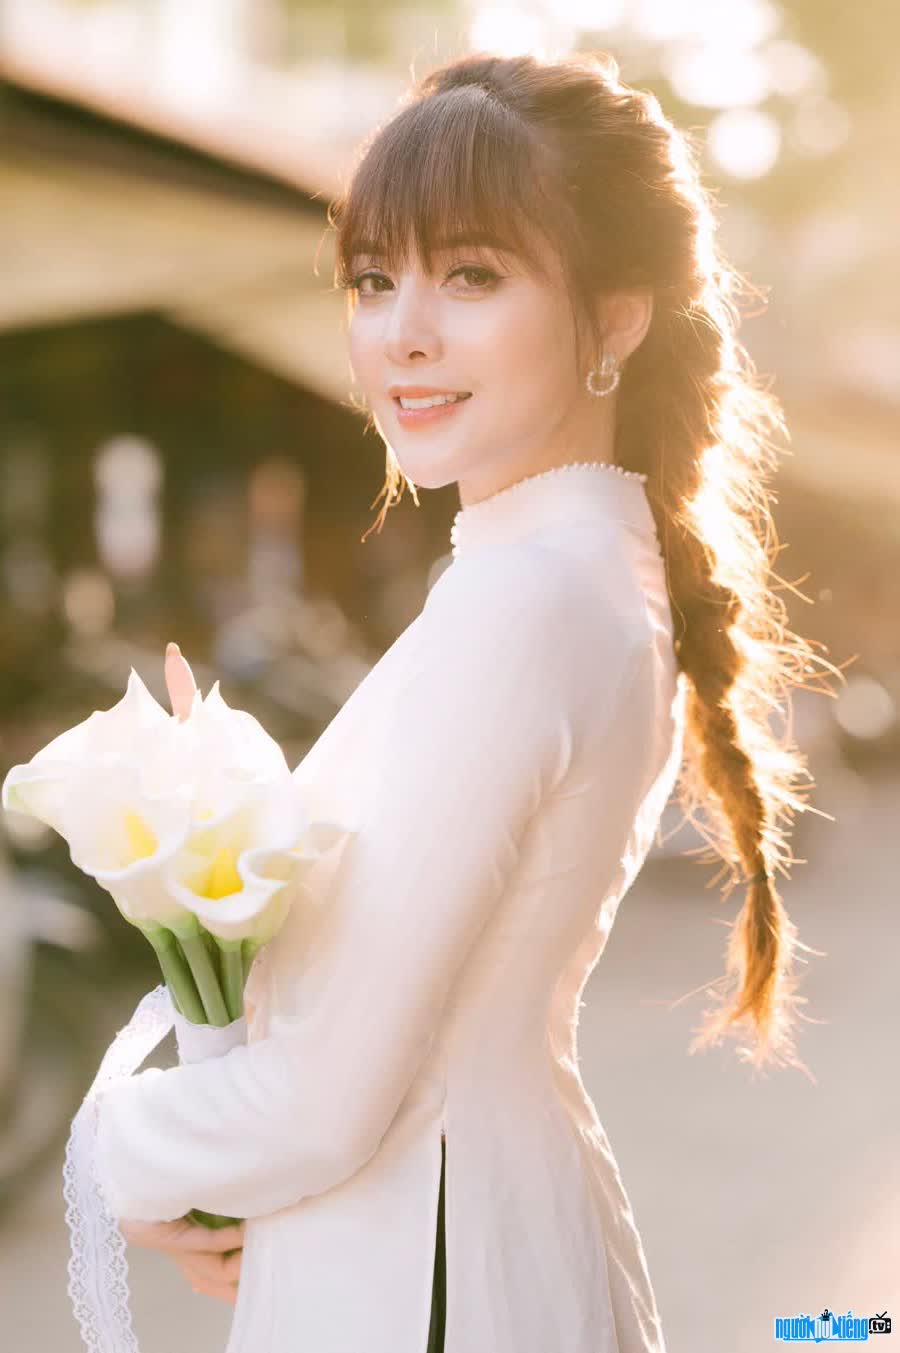 Actor Tran Thu's picture is pure and beautiful when wearing a white ao dai